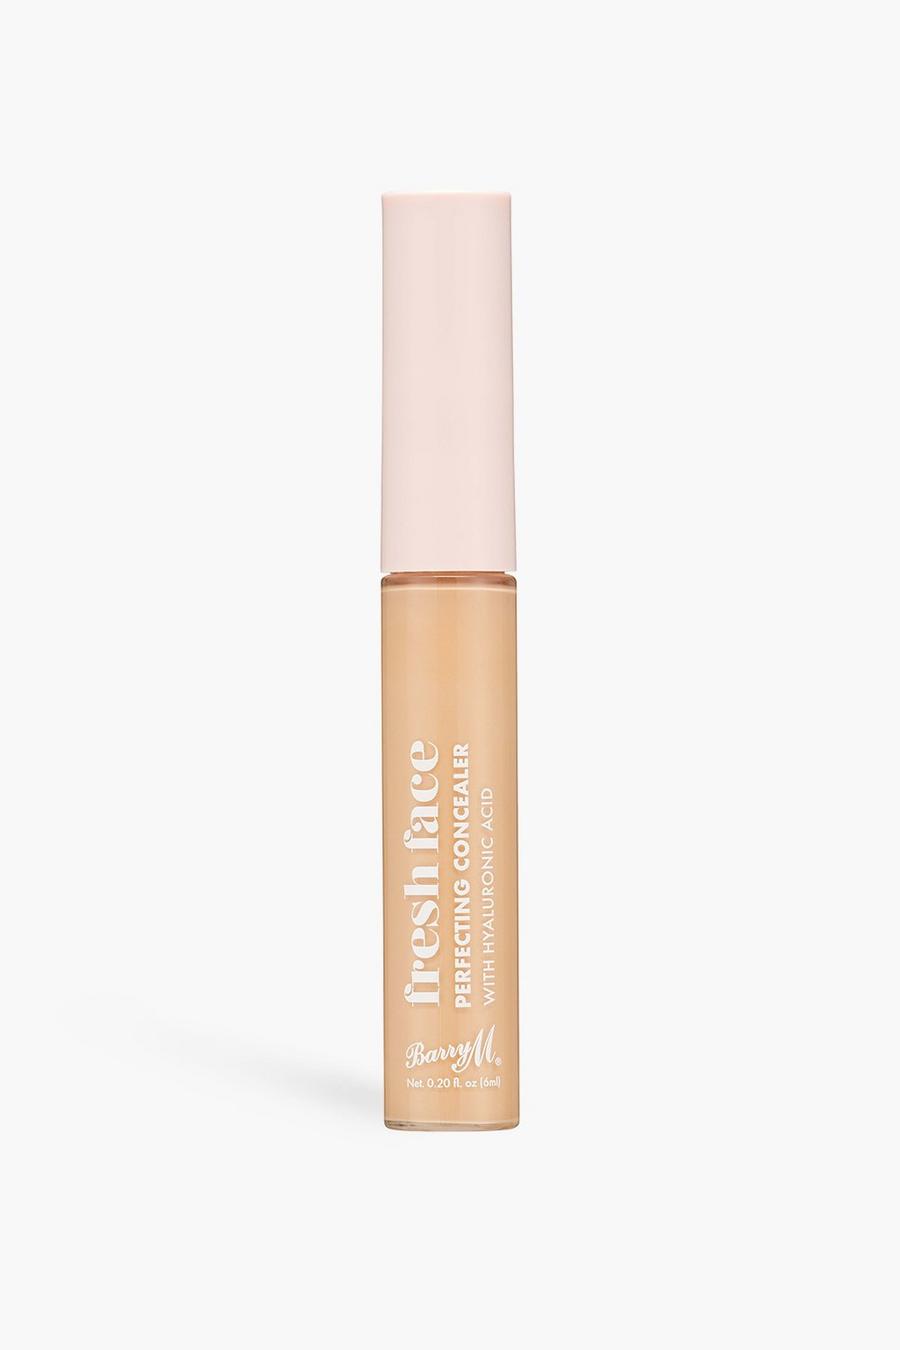 Tan marrone Fresh Face Perfecting Concealer – קונסילר 4 של Barry M